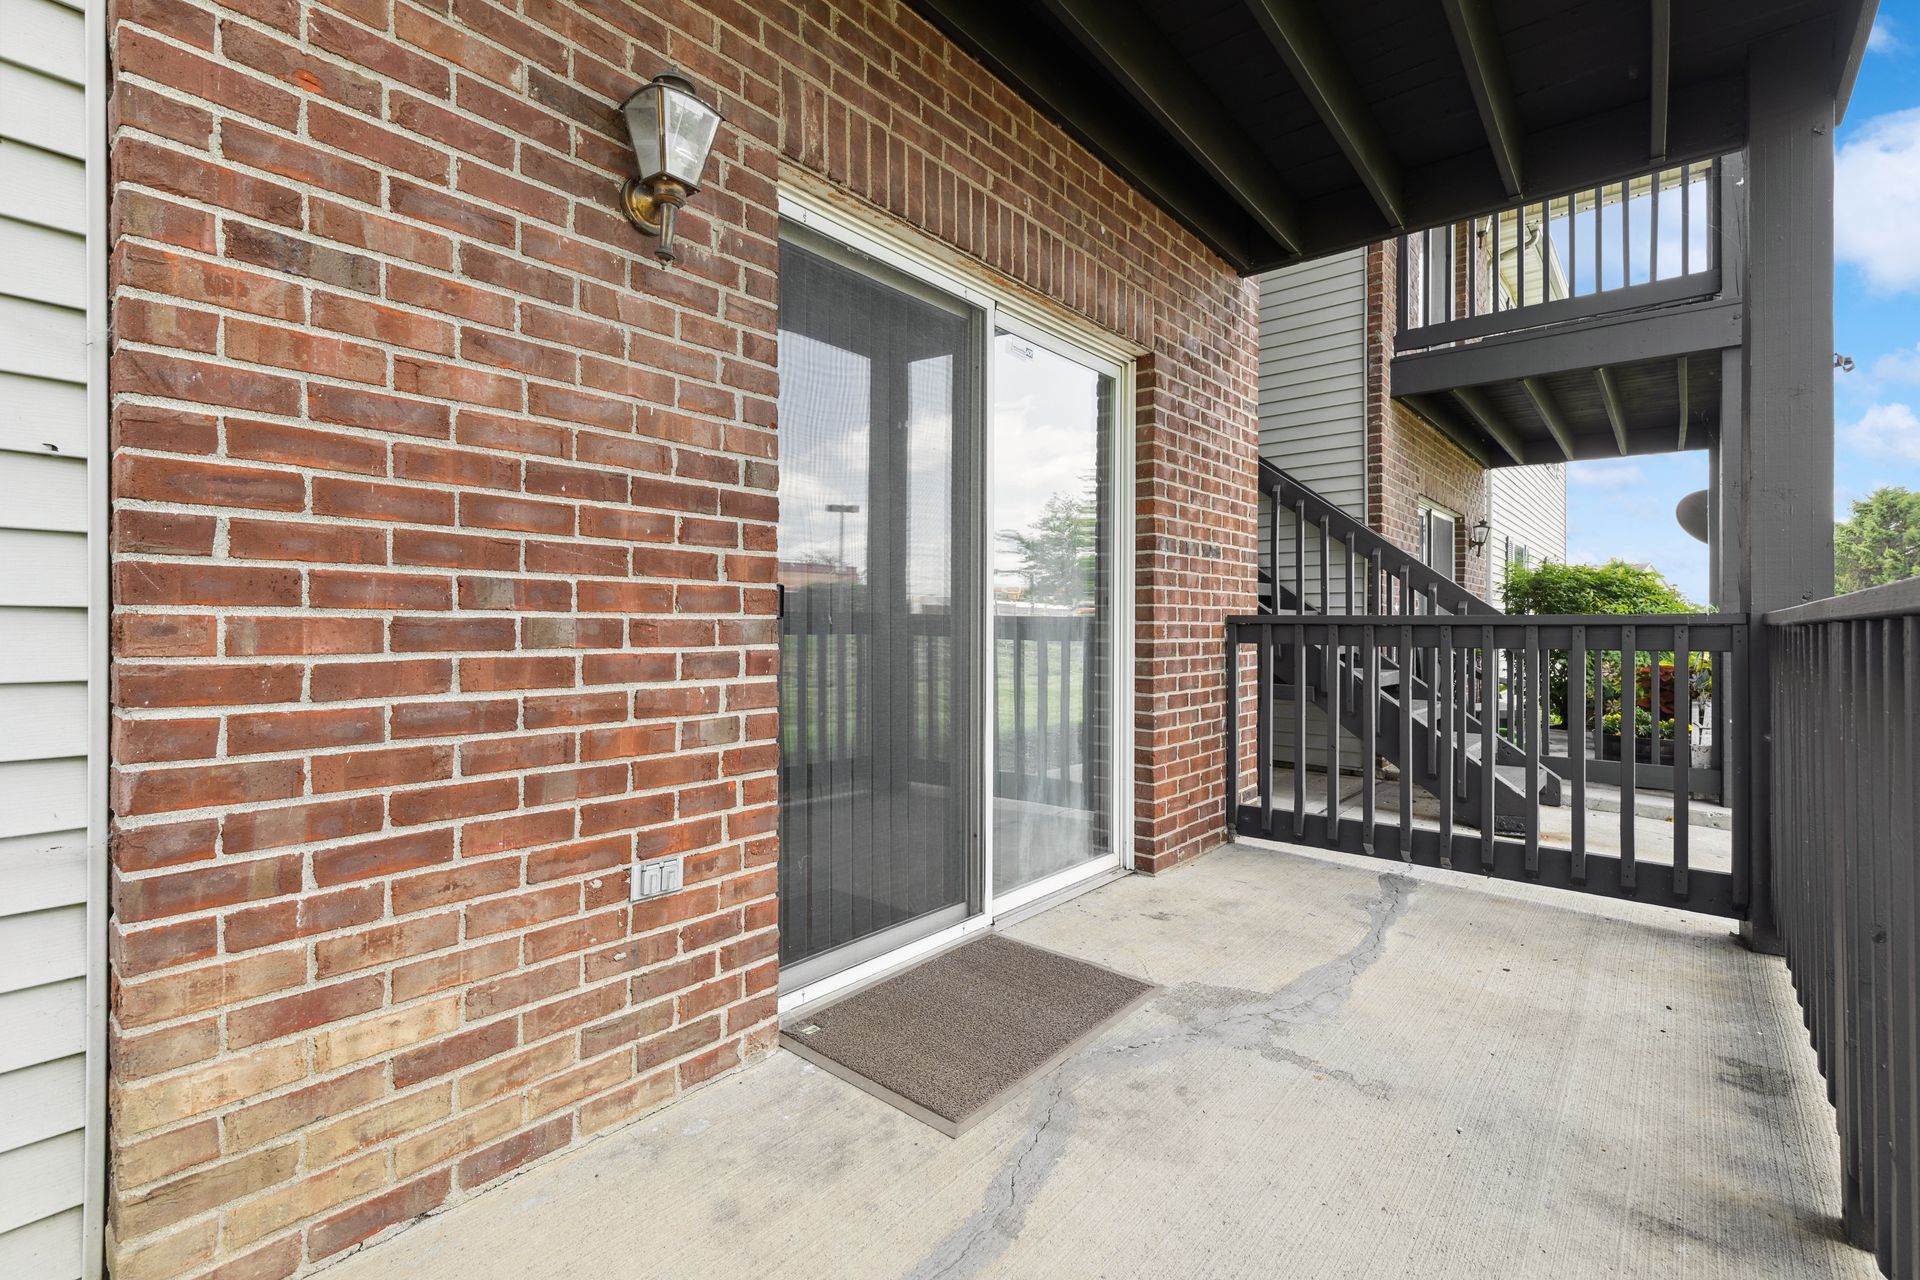 A brick building with a sliding glass door and a balcony.